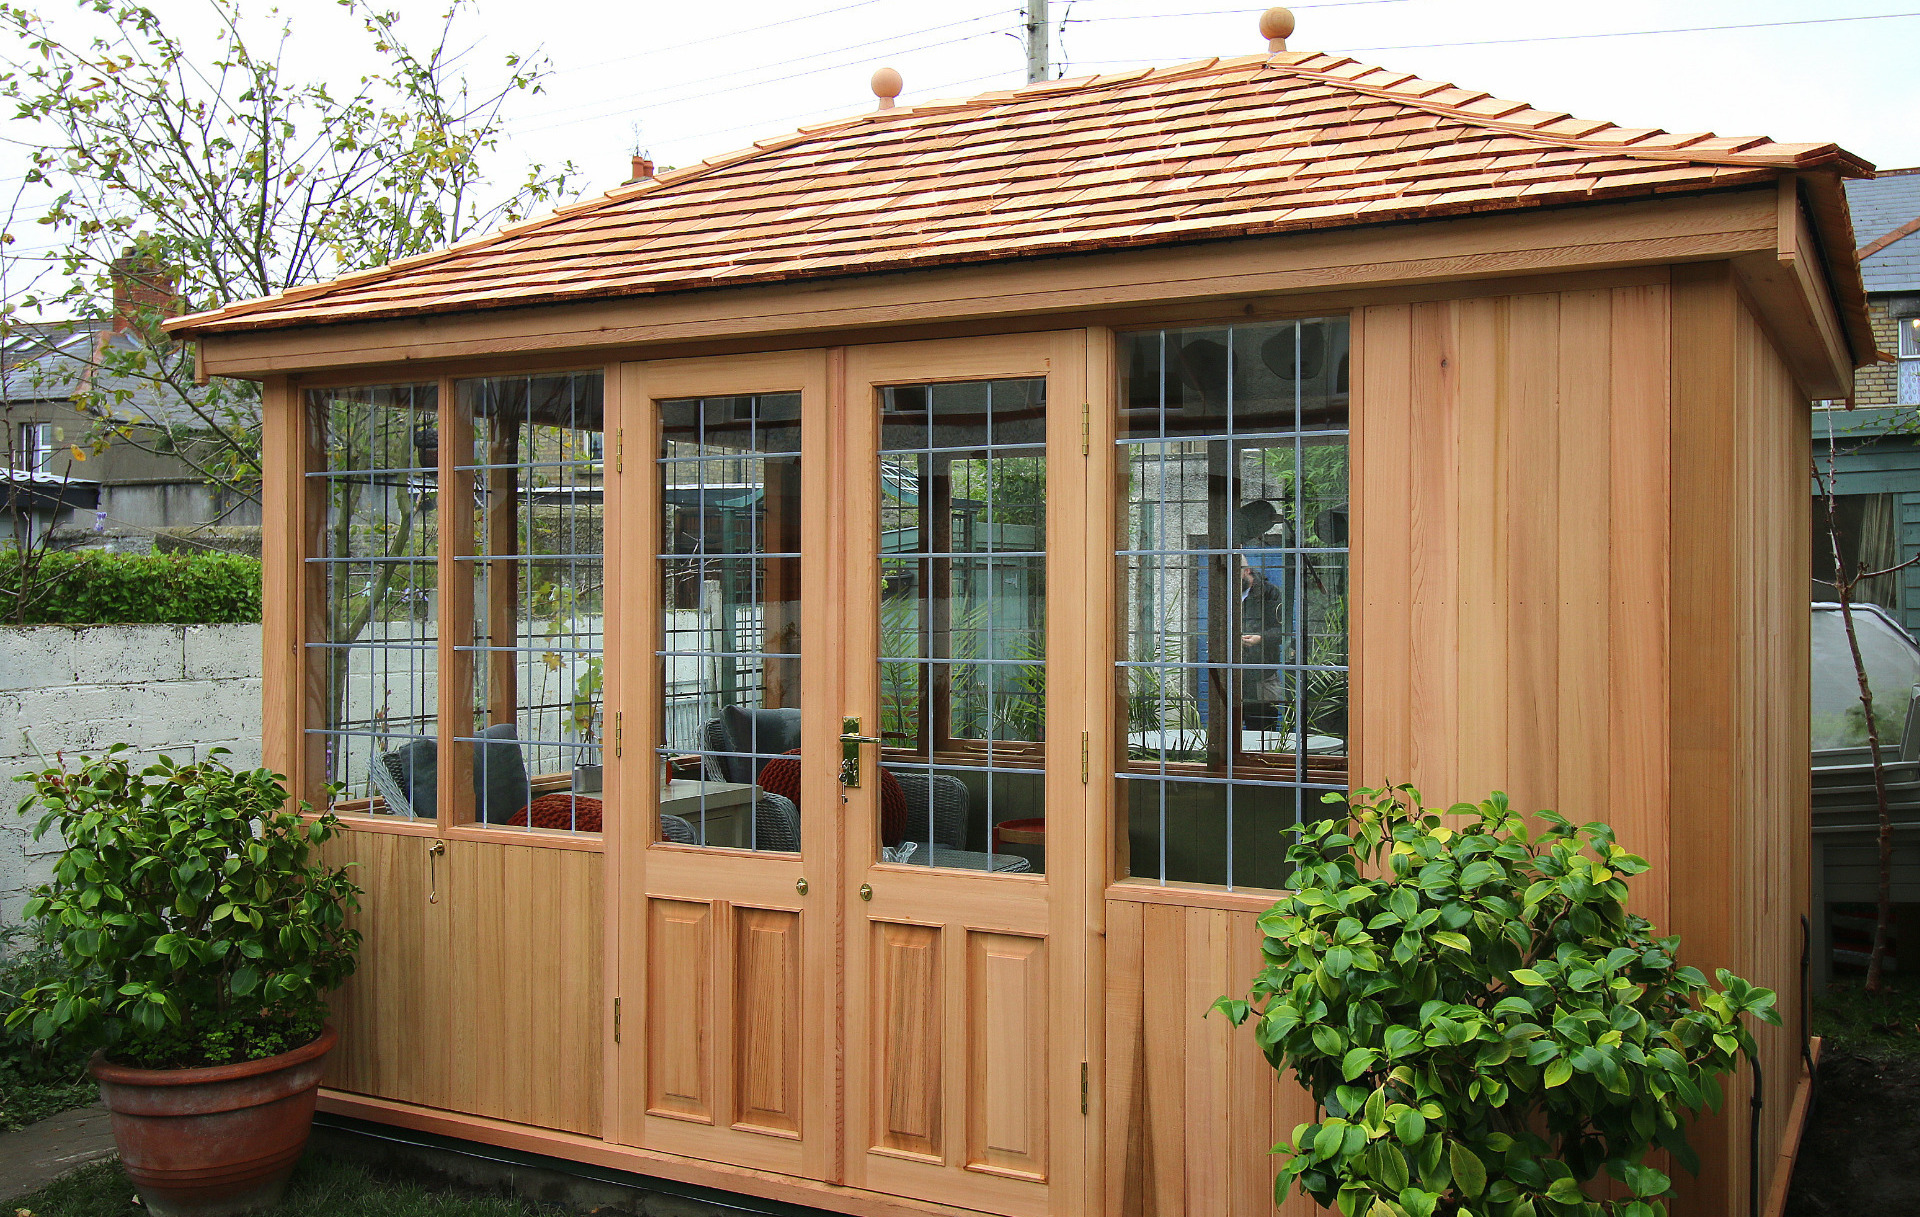 Stunning cedar timber garden rooms and summerhouses, supplied + fitted in Terenure, Dublin 6W.